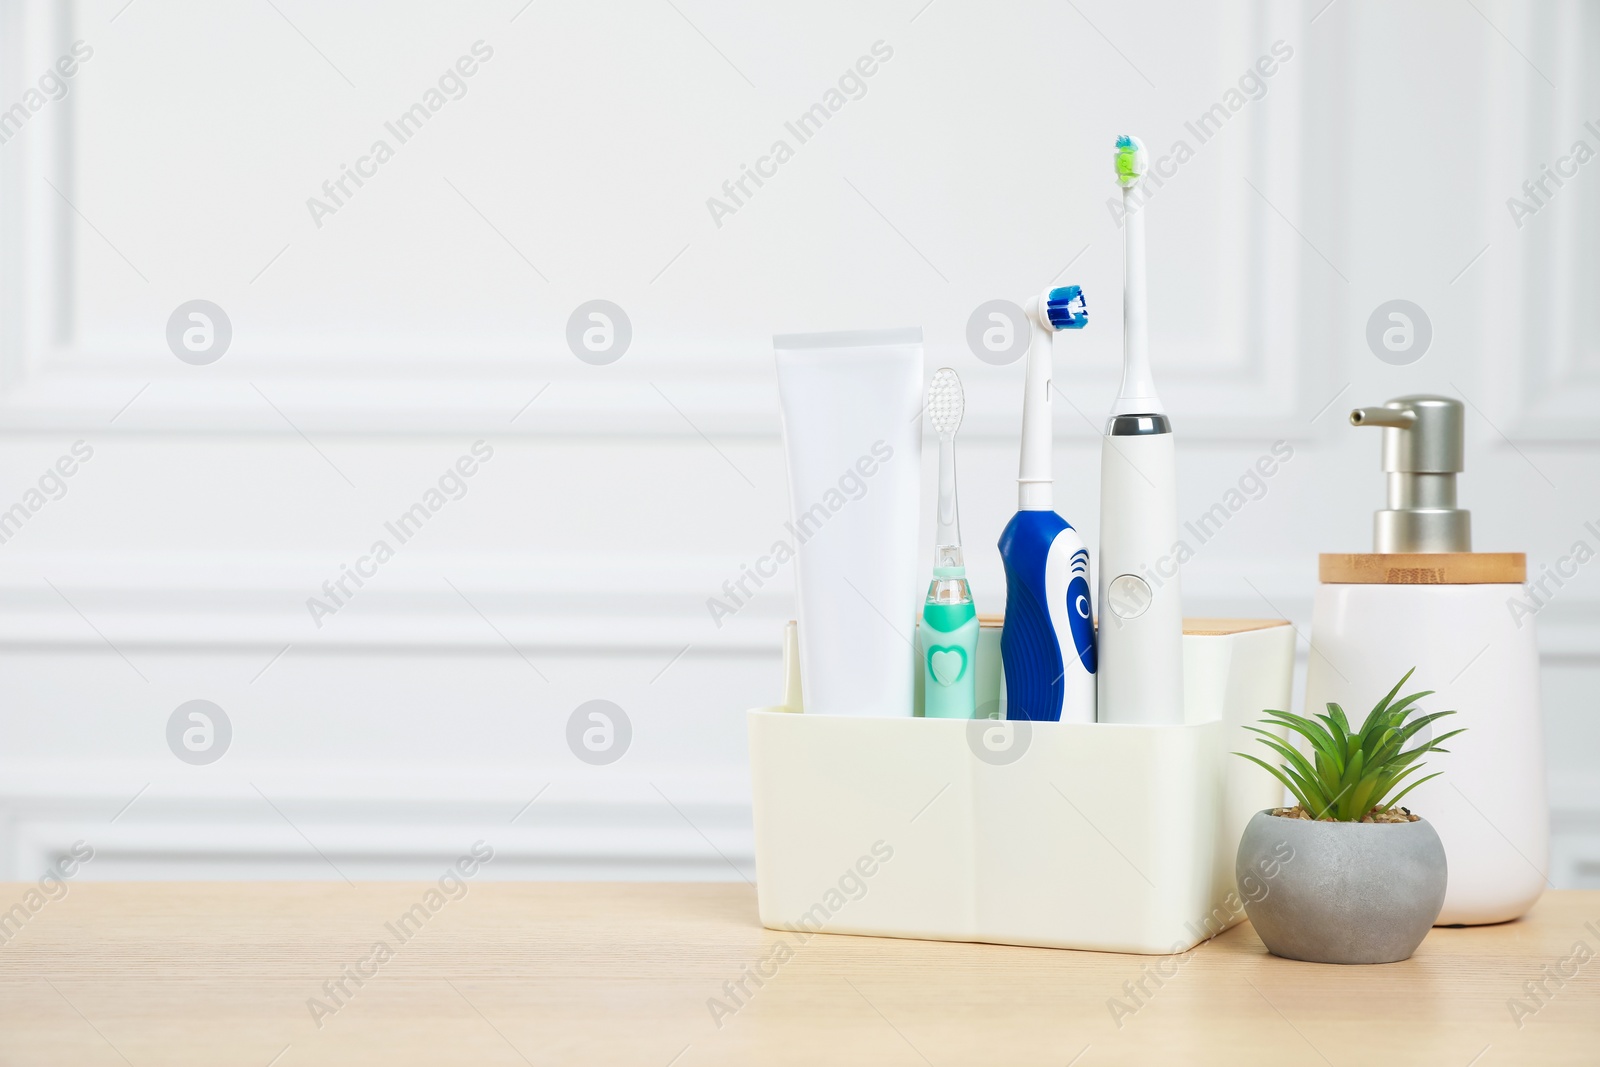 Photo of Electric toothbrushes and soap dispenser on wooden table. Space for text